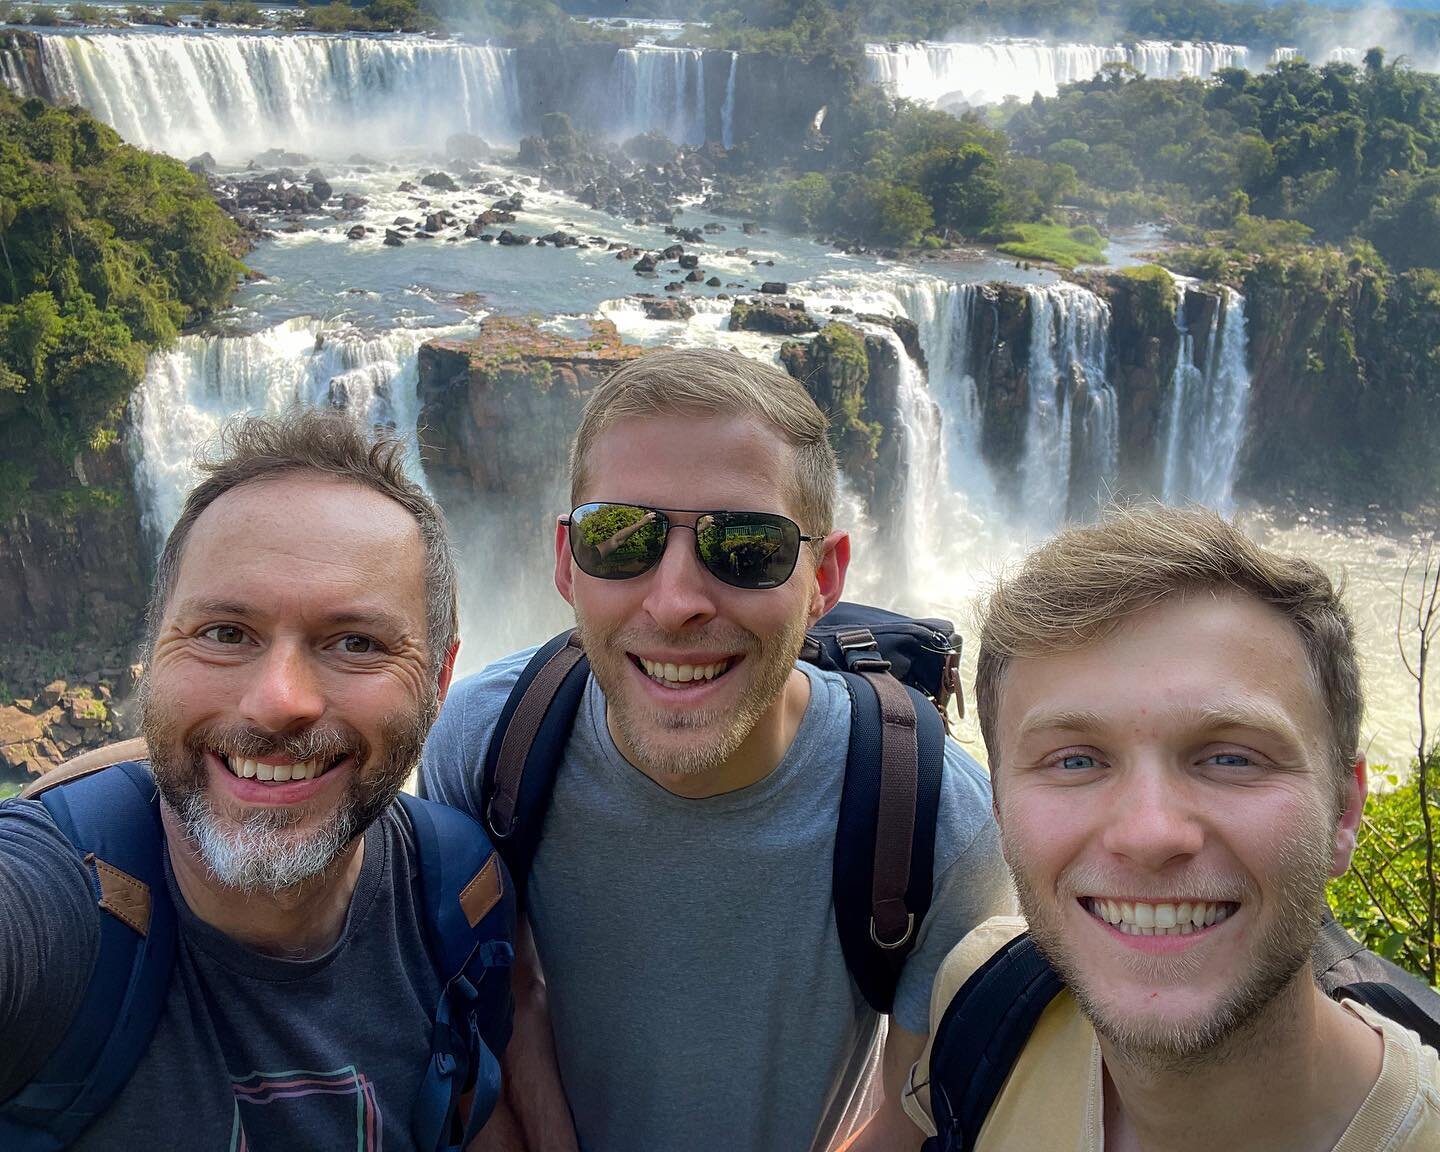 Since we were already in Brazil, I couldn&rsquo;t resist visiting a place near the top of my bucket list - Iguaz&uacute; Falls, the largest waterfall system in the world!

I honestly never really thought I&rsquo;d make it here, and I&rsquo;m really g